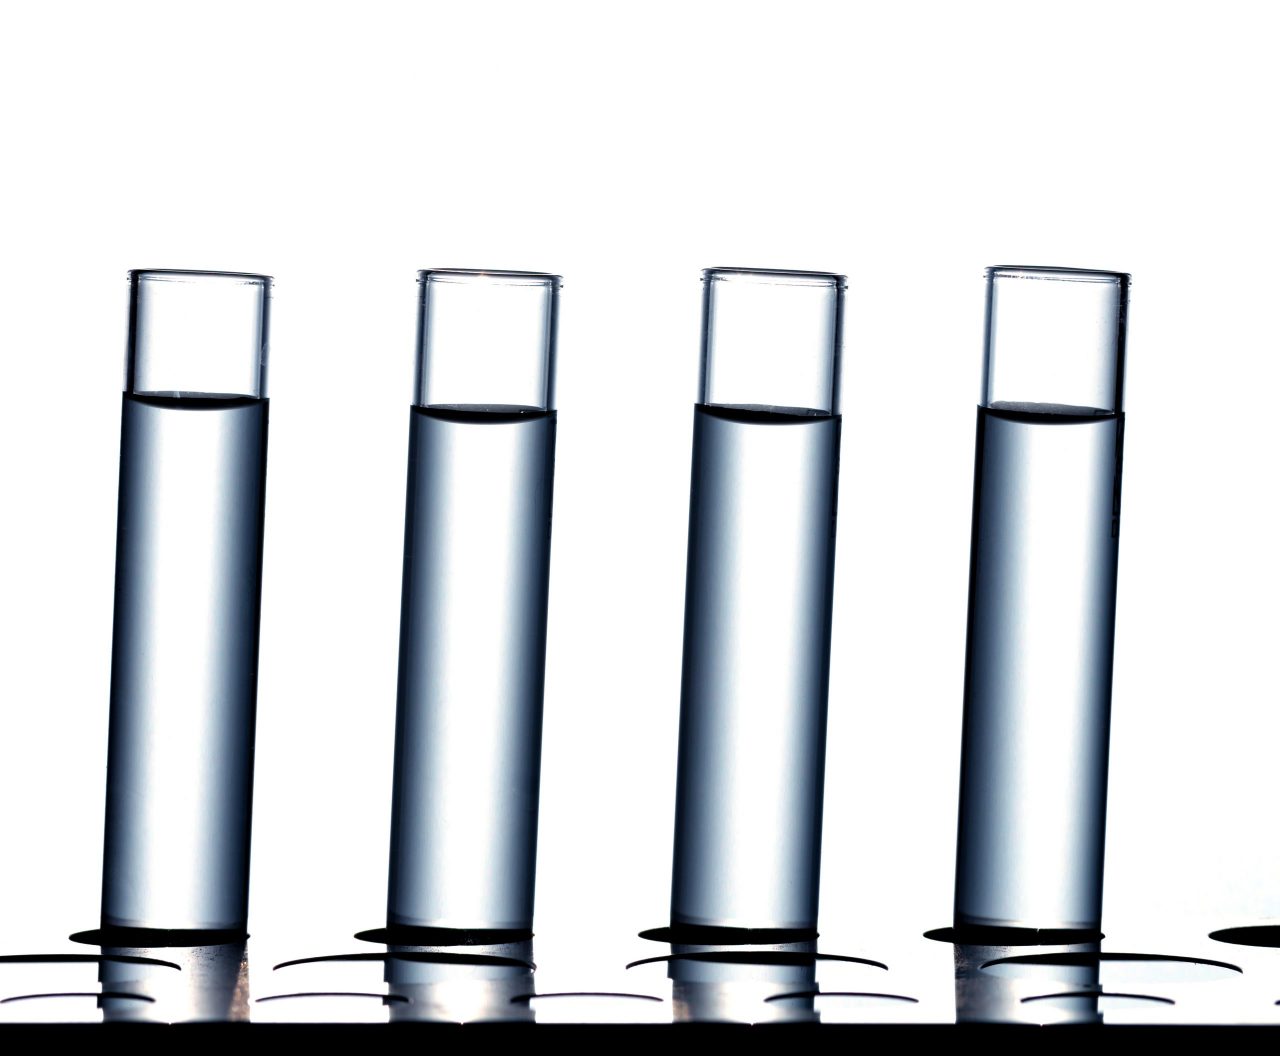 science-laboratory-research-test-tubes-976HDW9-scaled-1280x1056-1.jpg